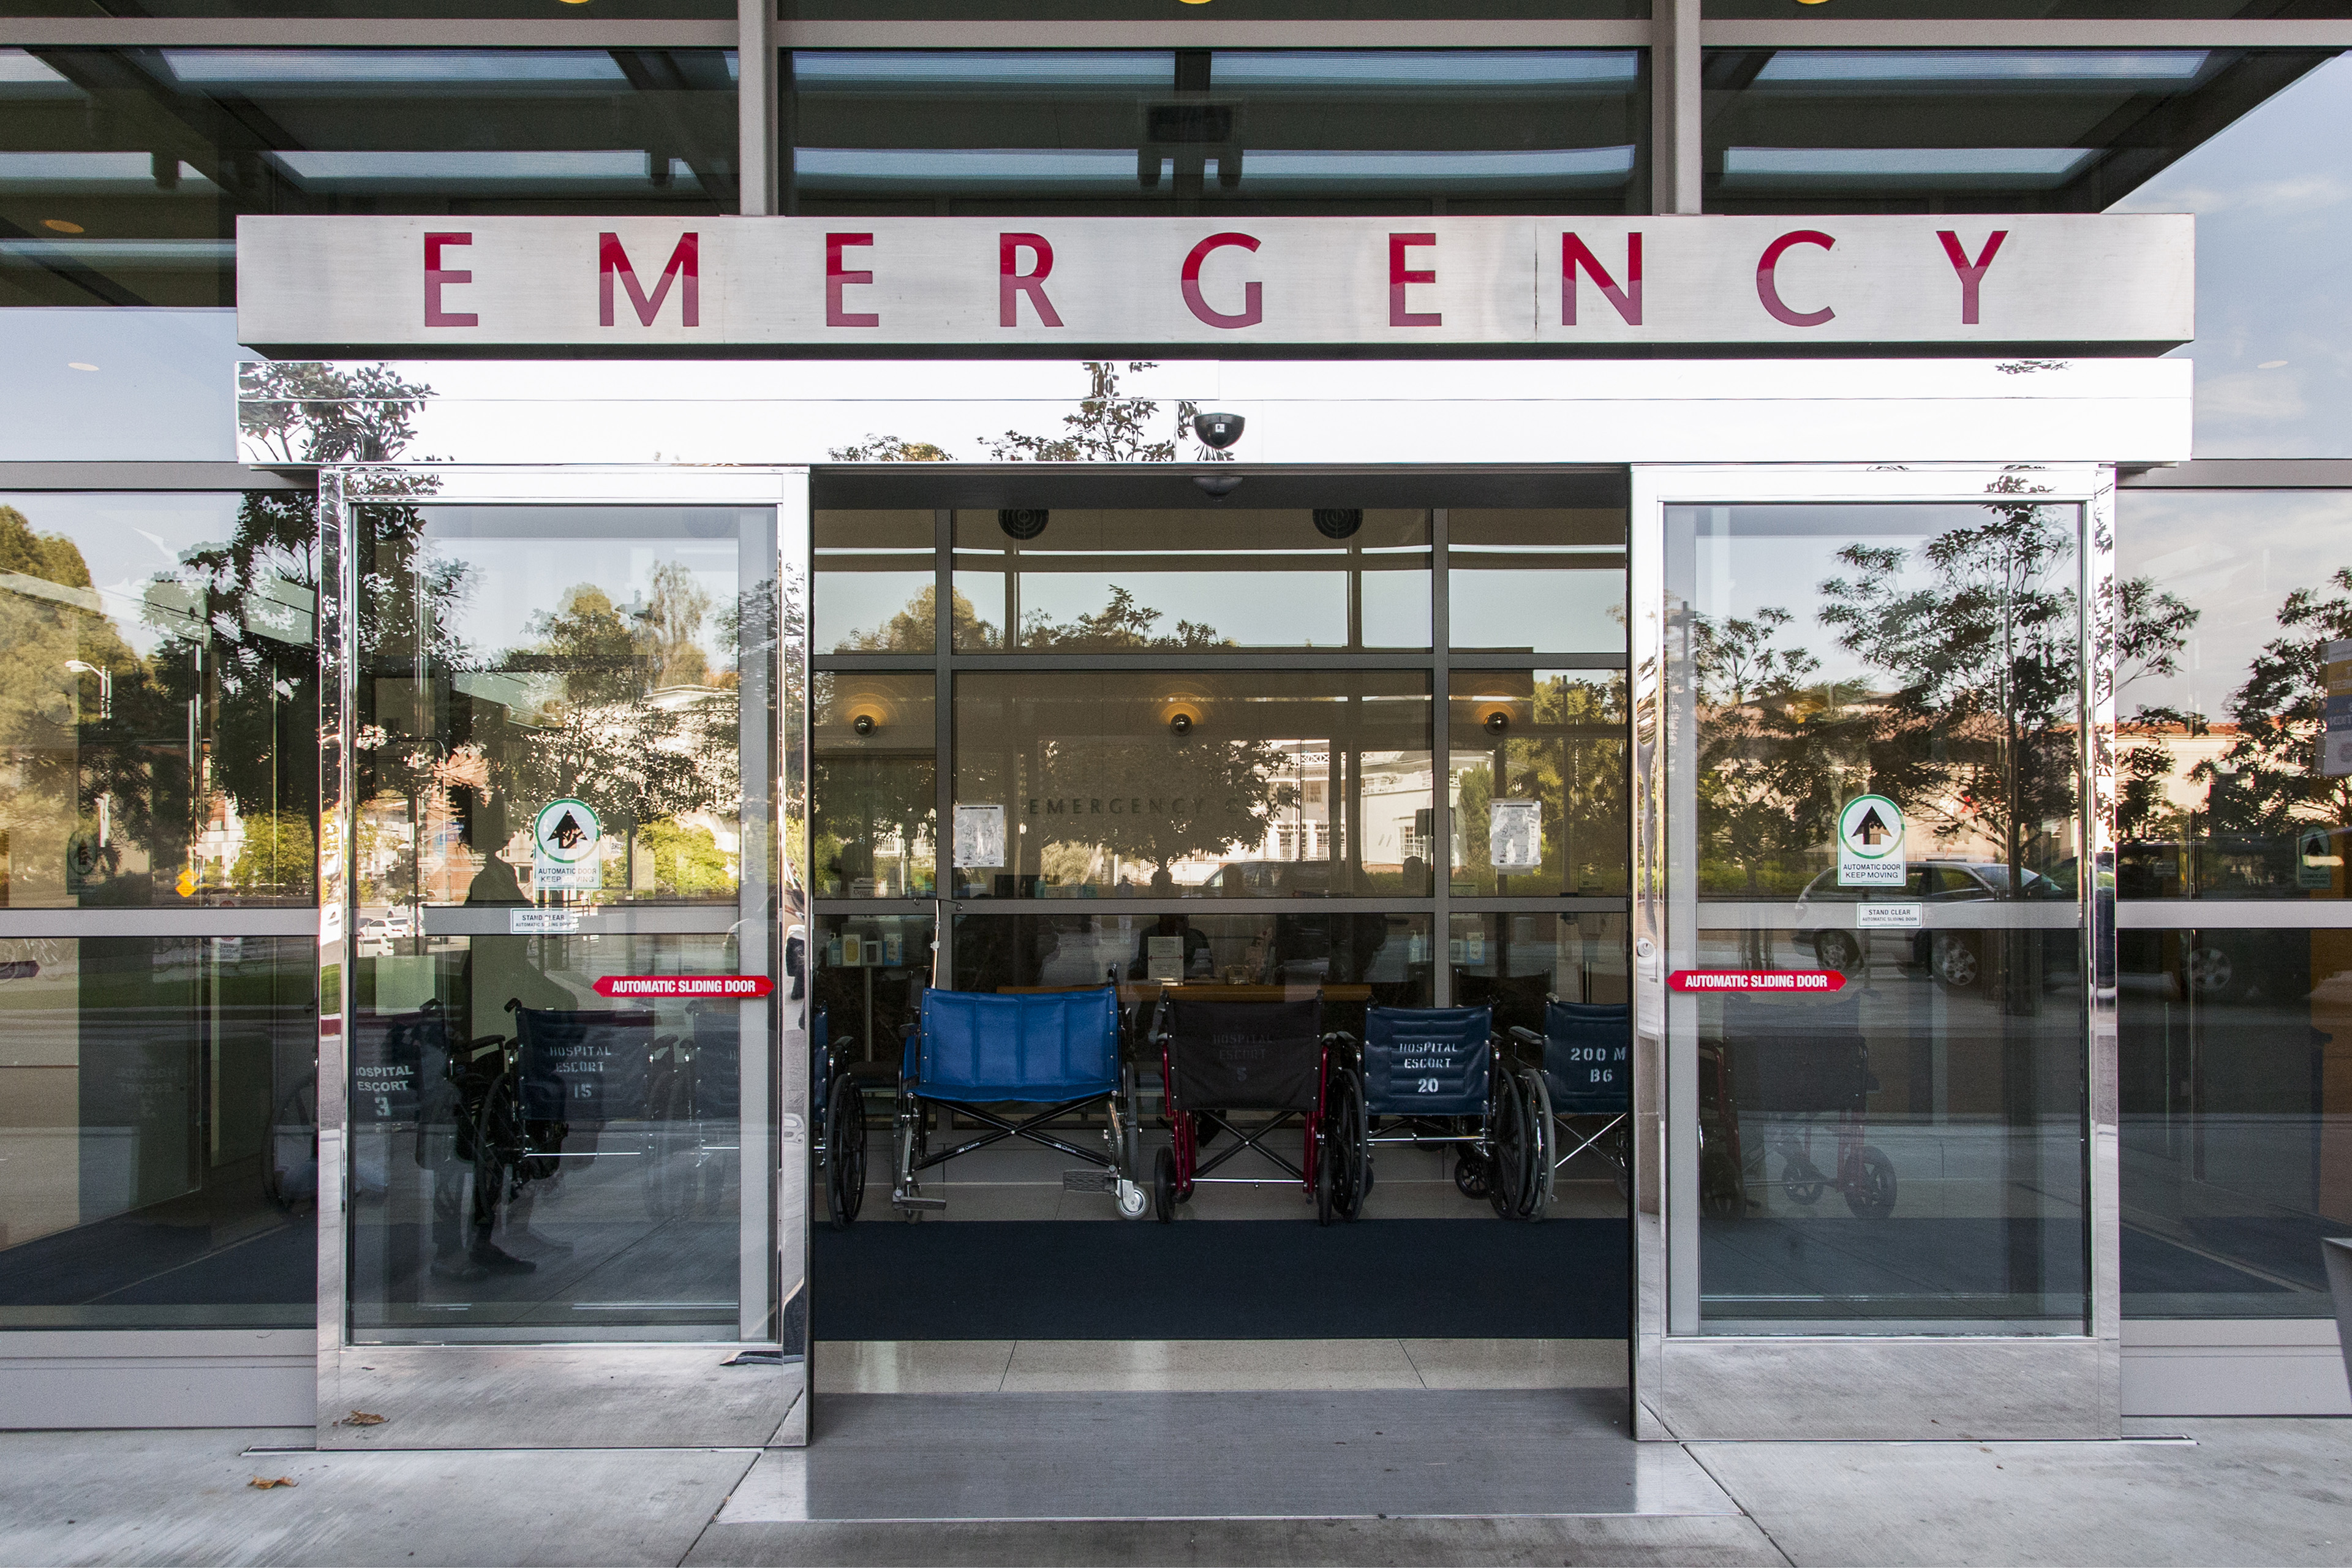 Doctors Are Disappearing From Emergency Rooms as Hospitals Look to Cut Costs